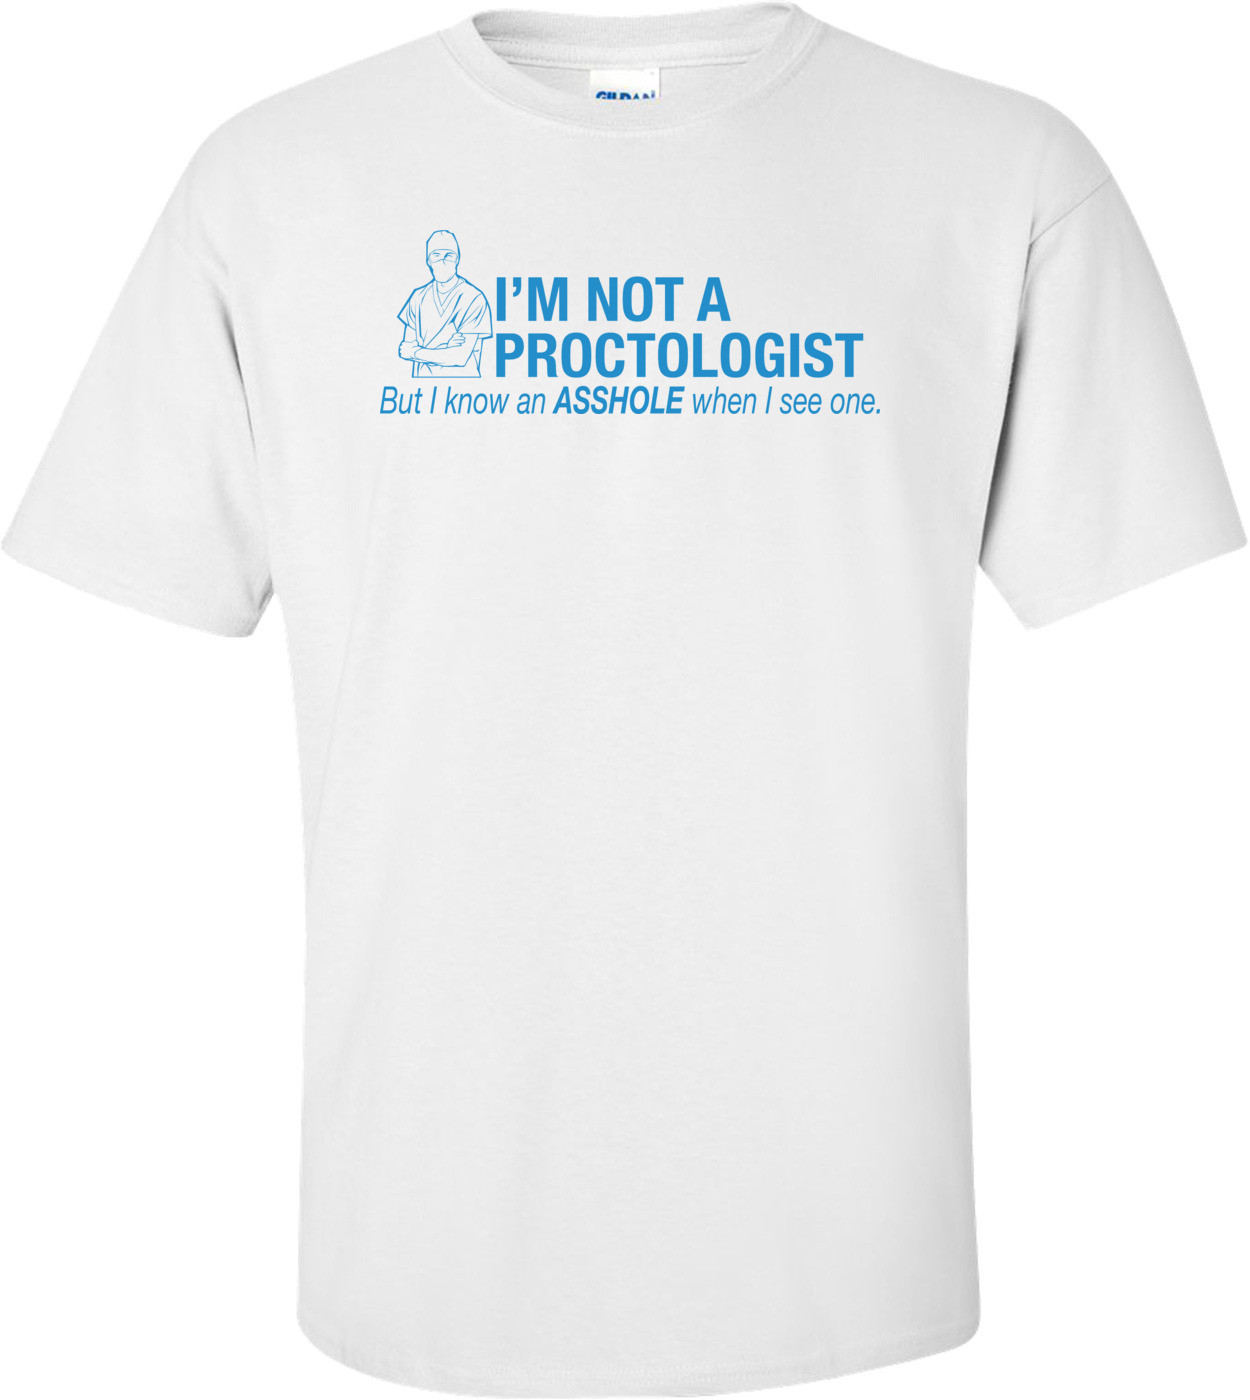 I'm Not A Proctologist, But I Do Know An Asshole When I See One T-shirt